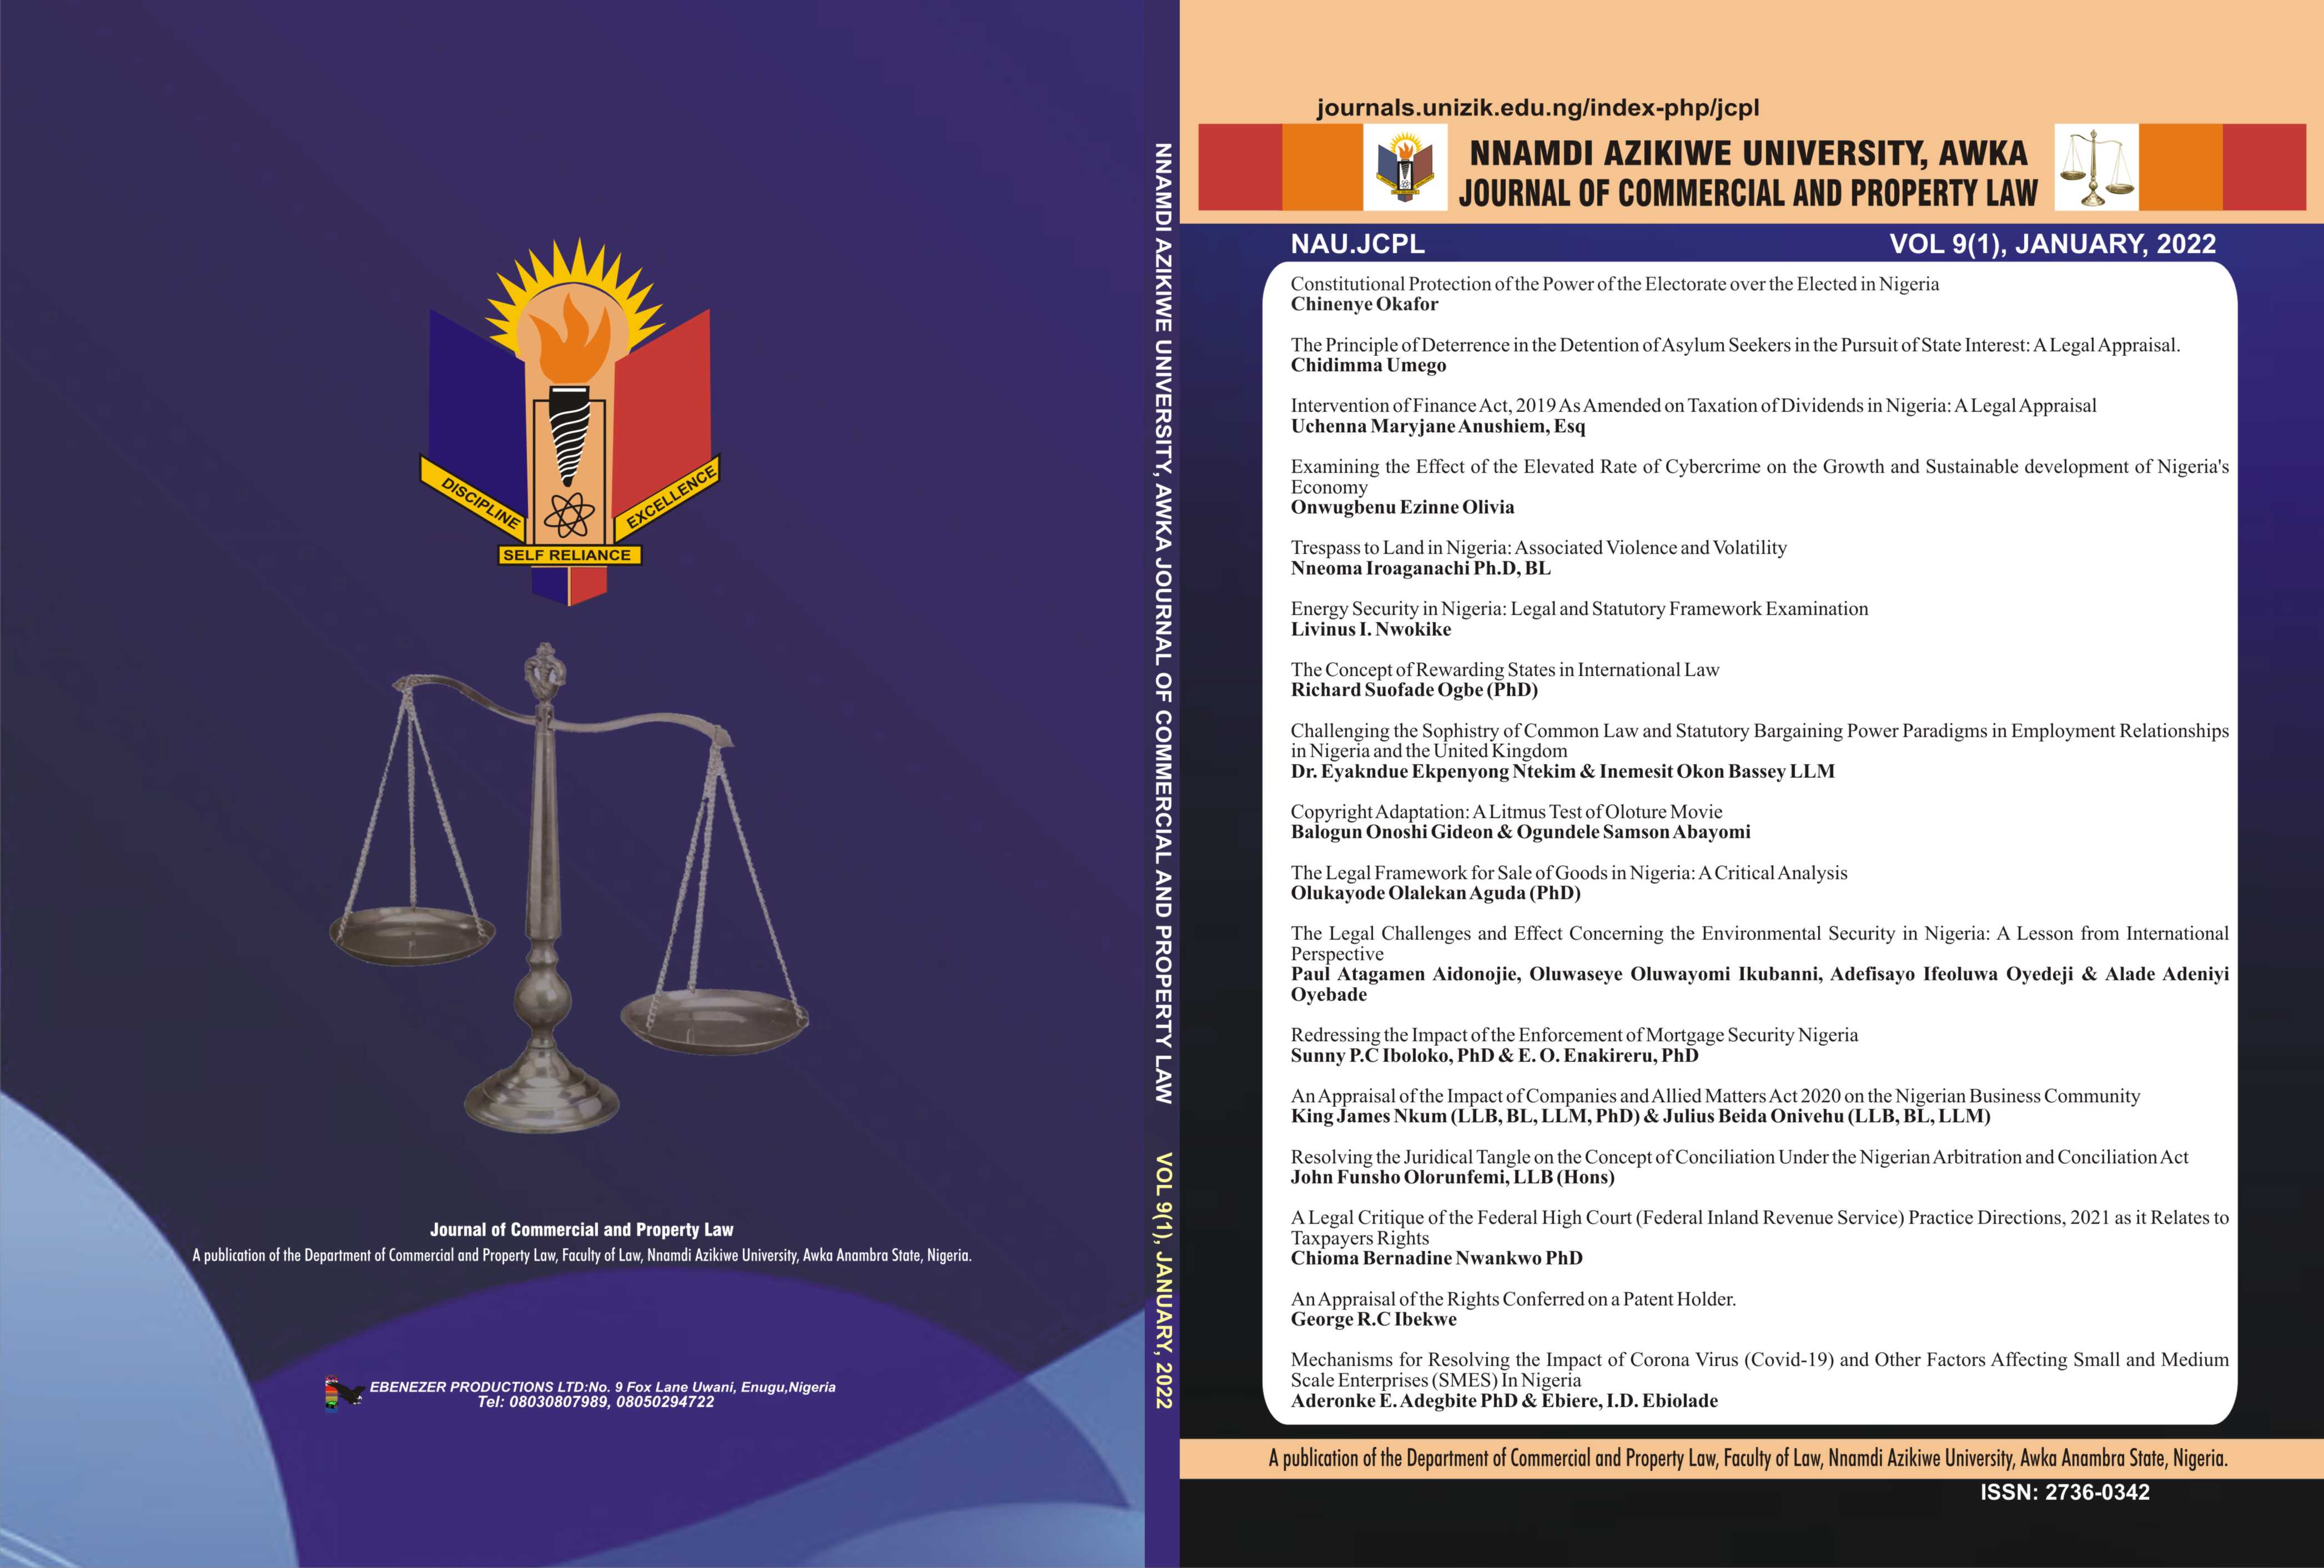 					View Vol. 9 No. 1 (2022): NNAMDI AZIKIWE UNIVERSITY JOURNAL OF COMMERCIAL AND PROPERTY LAW
				